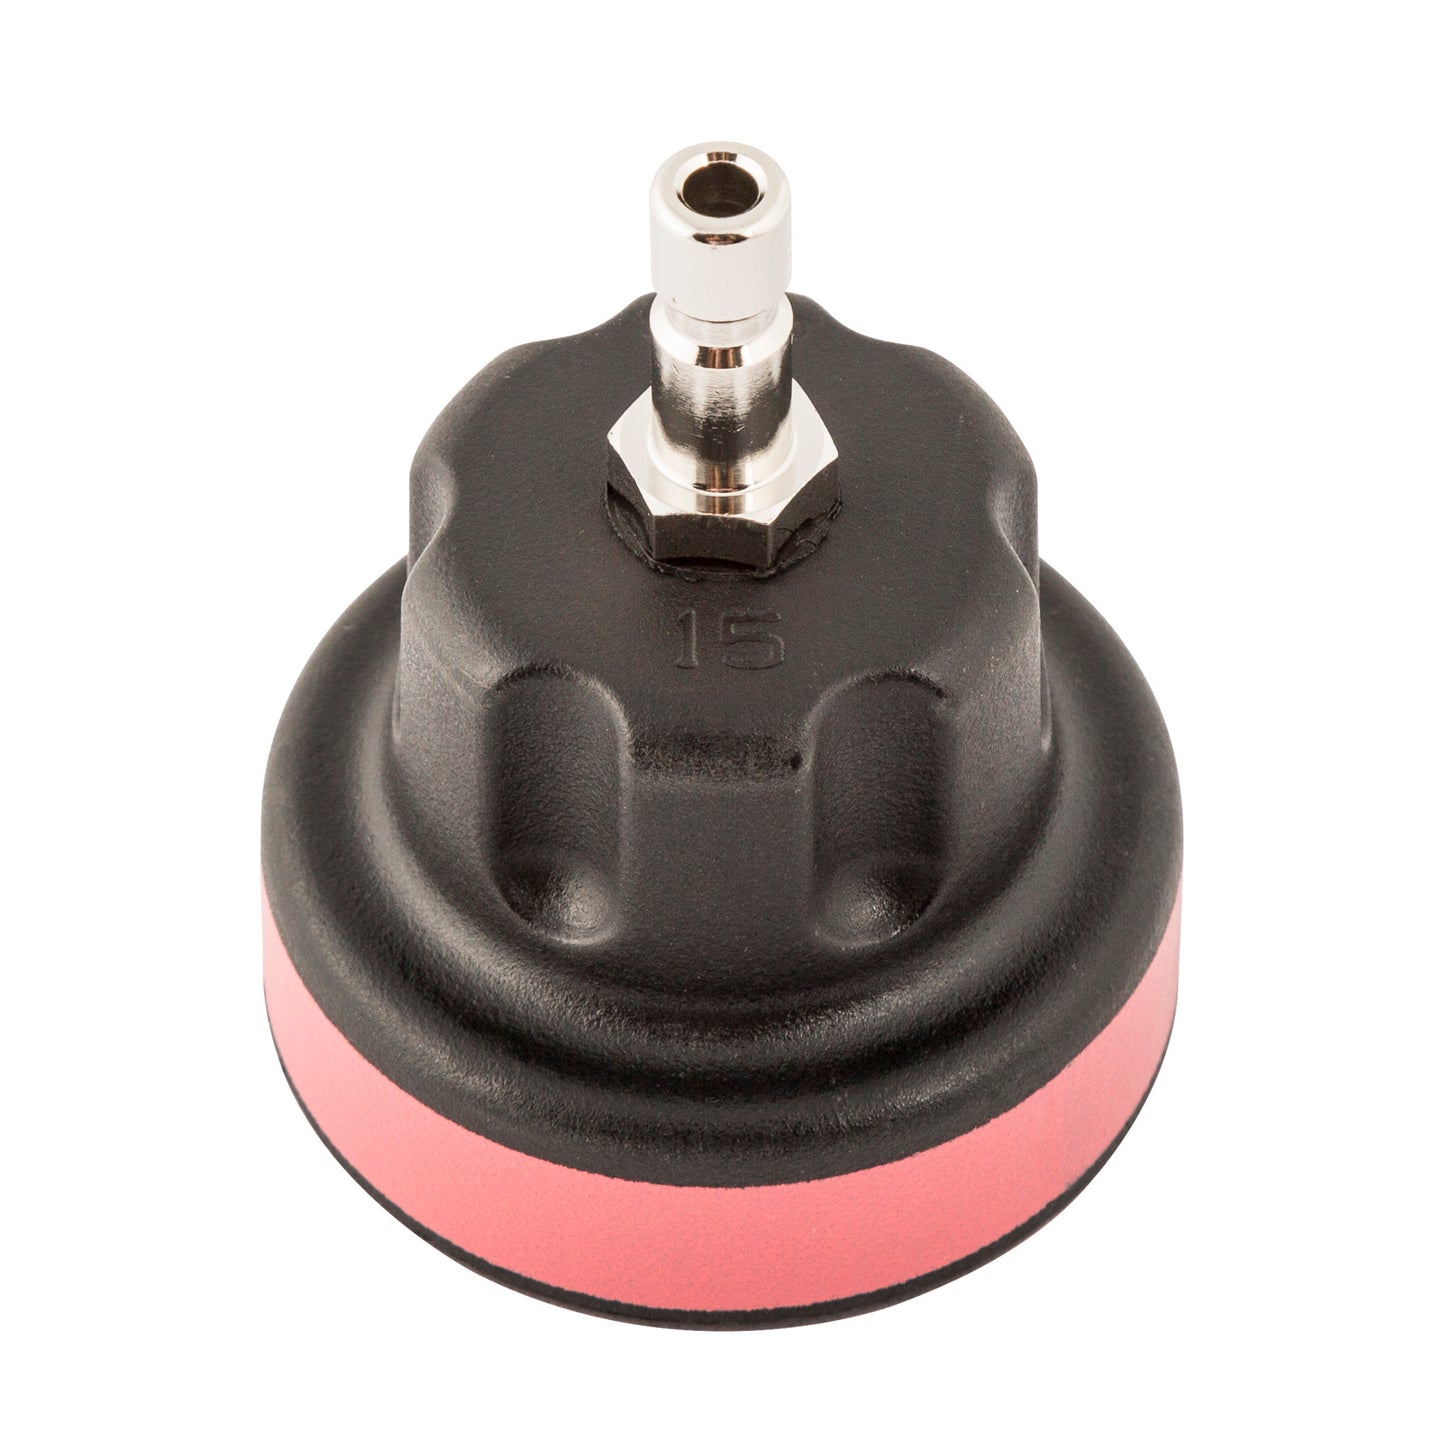 Nylon NO.15 Radiator Expansion Tank Test System Adapter for Ford, Land Rover, Mazda, and Volvo